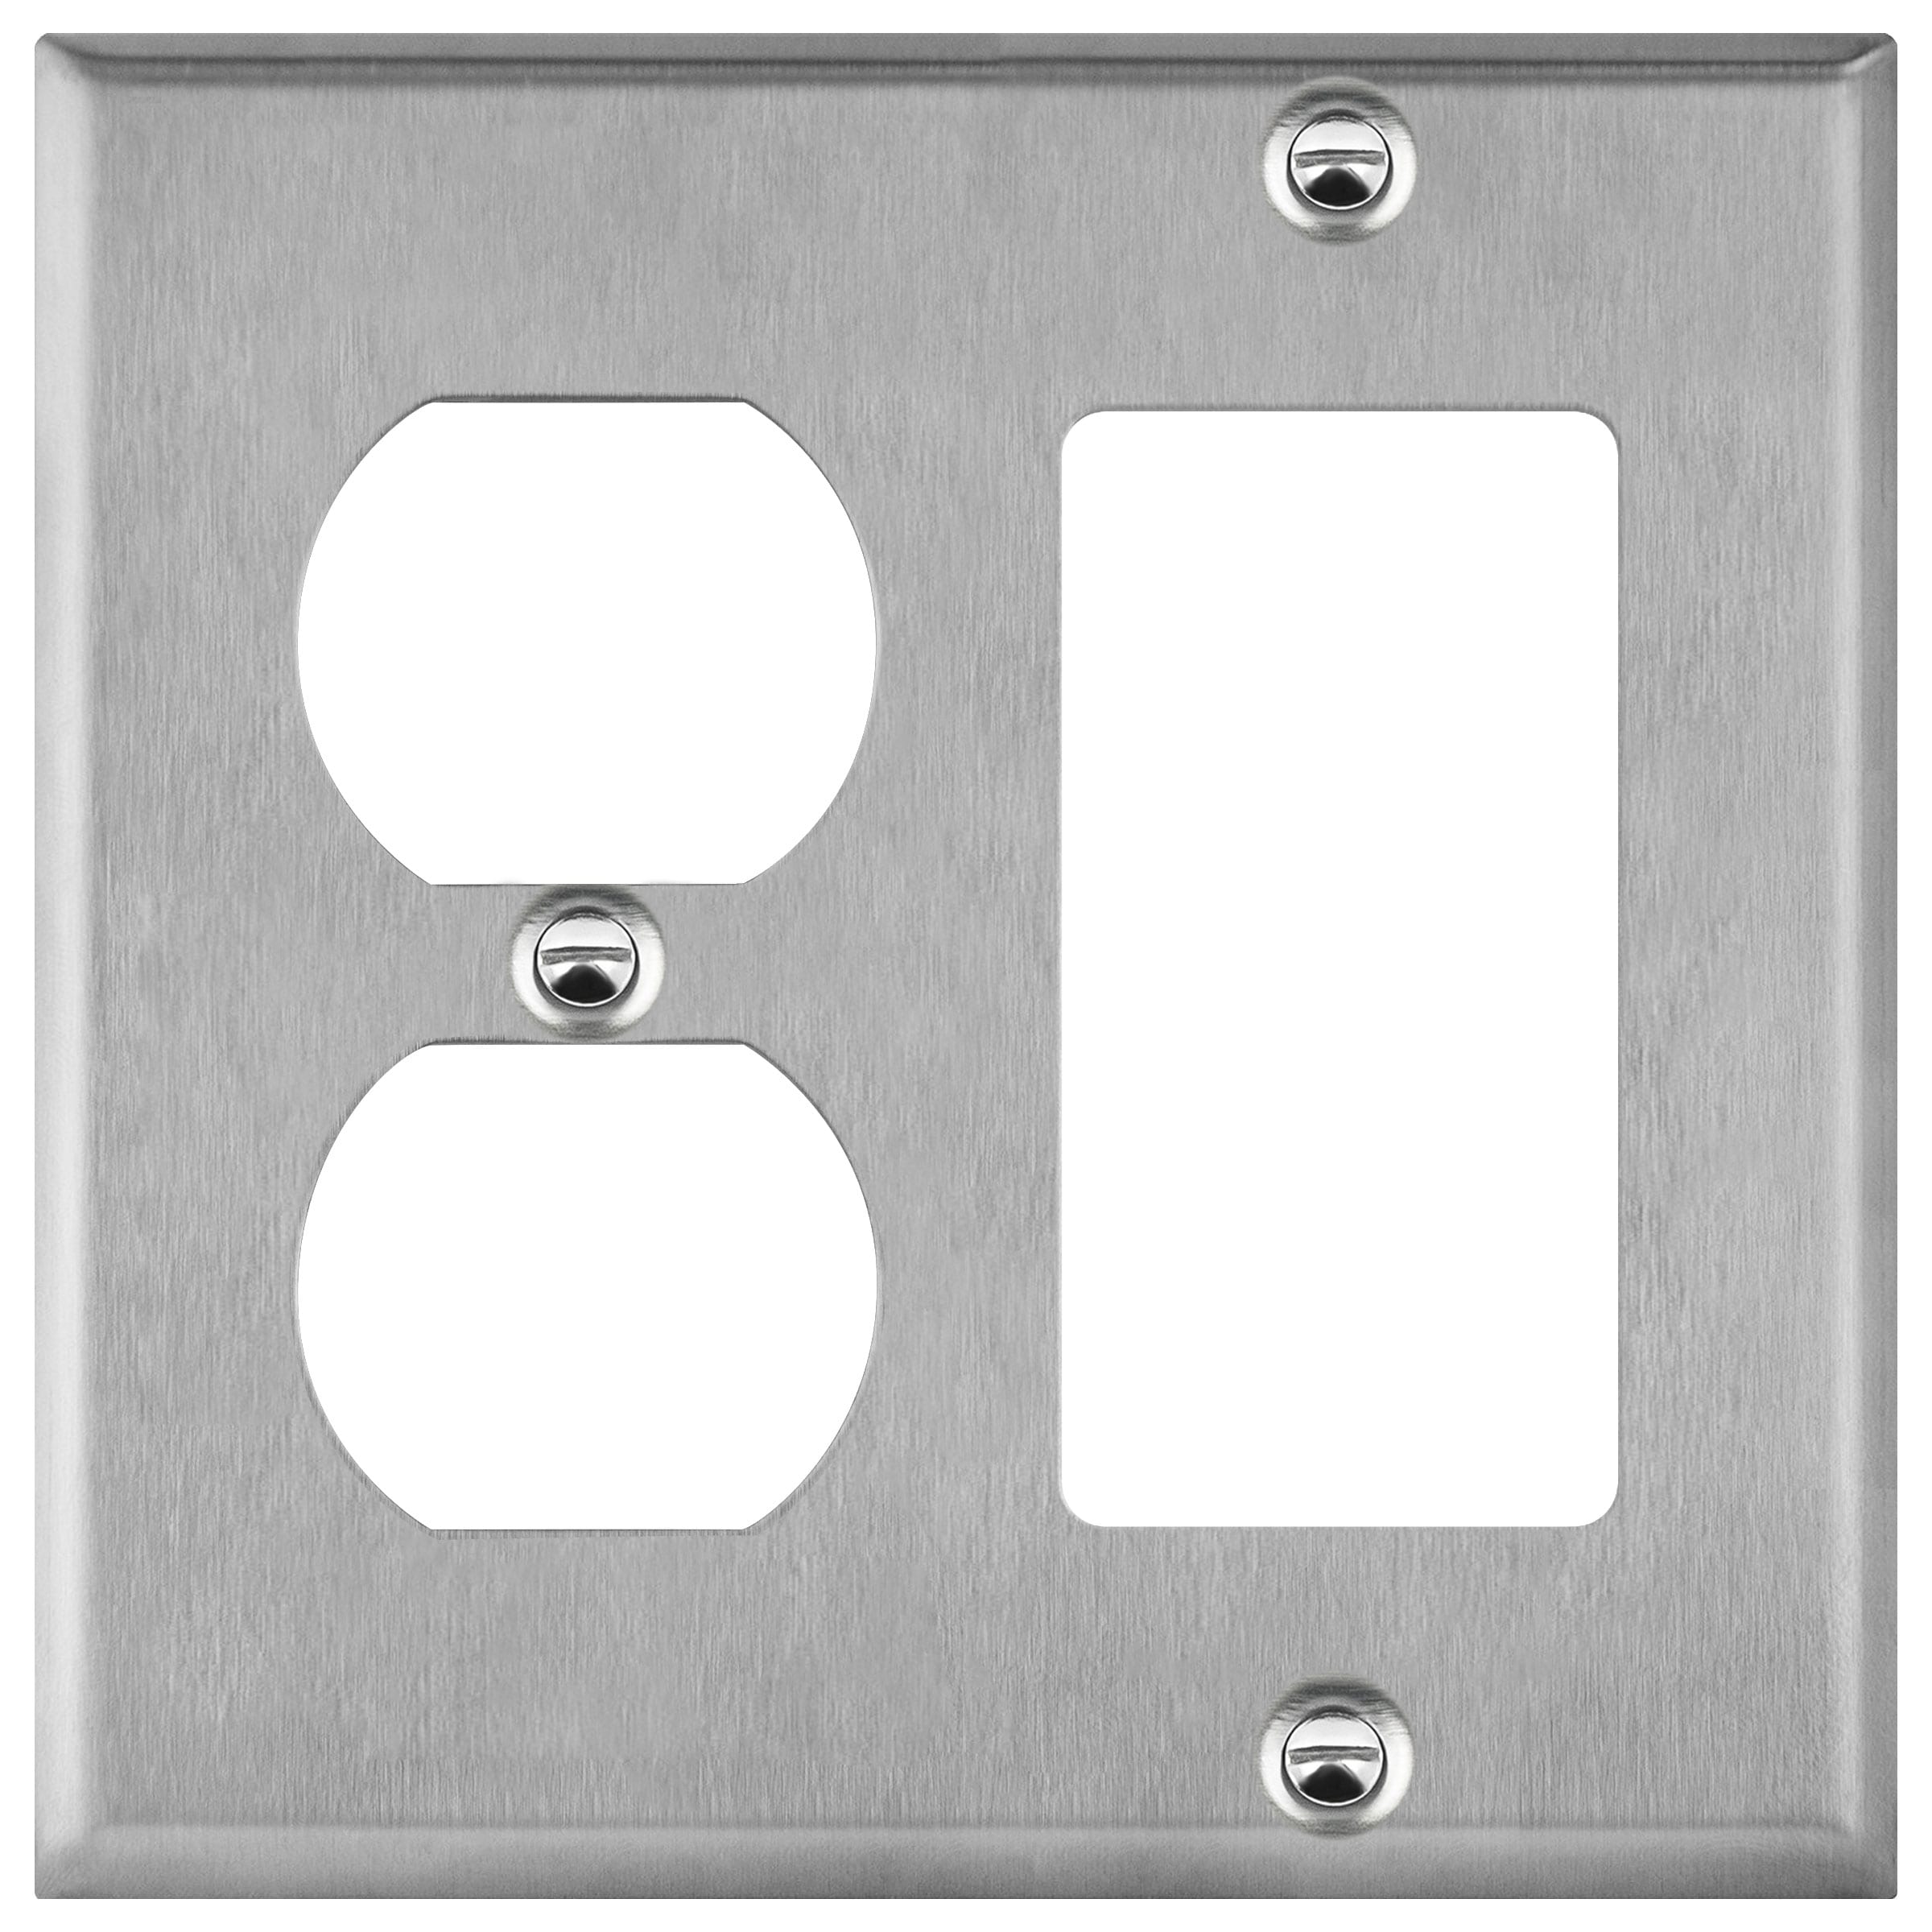 2-Gang Stainless Steel Decorator/Duplex Outlet Combination Wall Plate